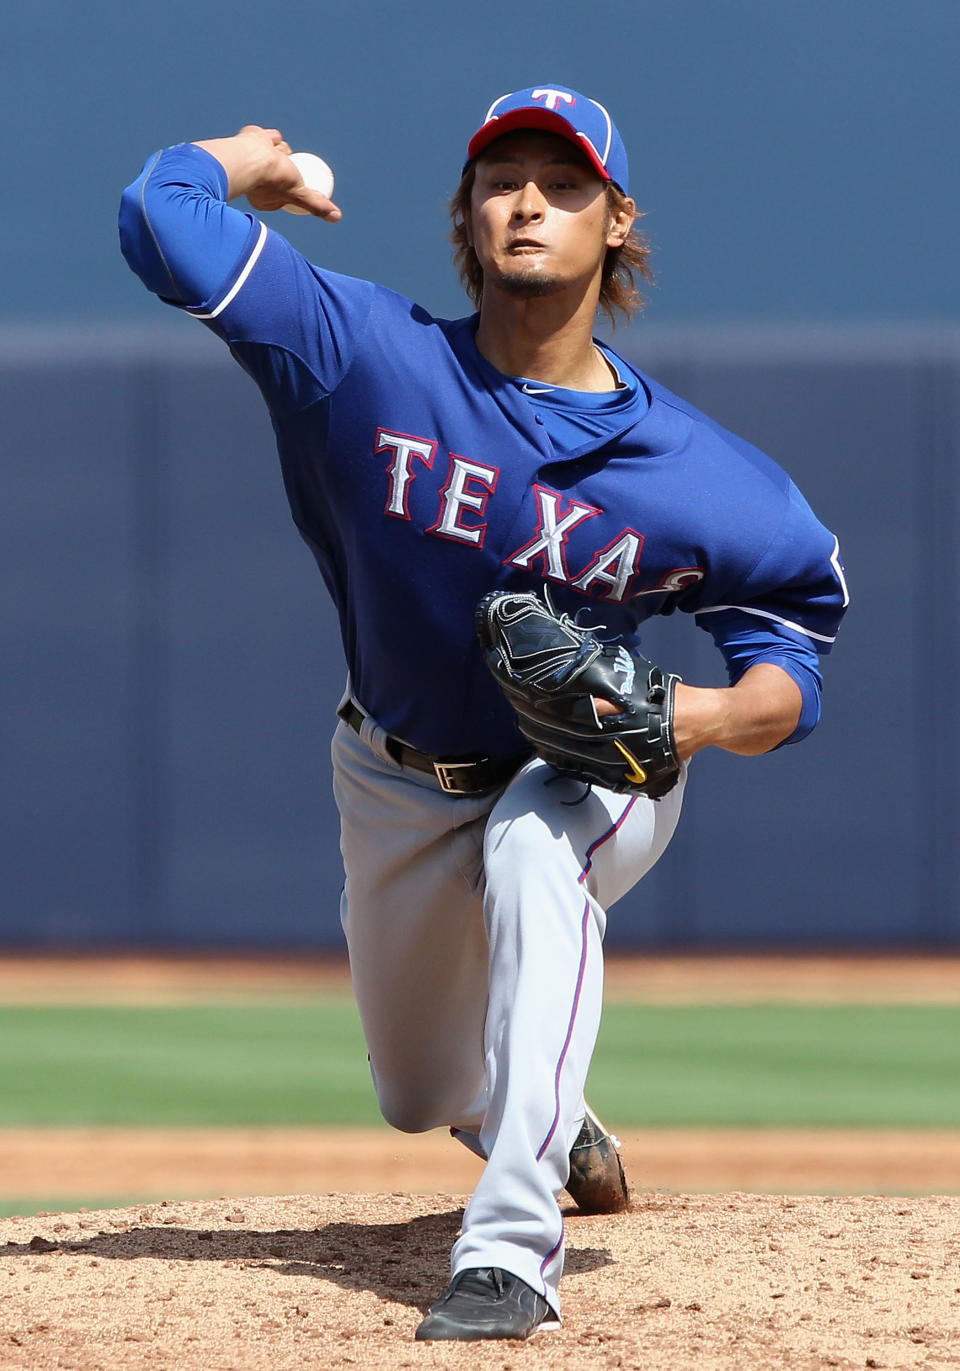 PEORIA, AZ - MARCH 07: Starting pitcher Yu Darvish #11 of the Texas Rangers pitches against the San Diego Padres during the spring training game at Peoria Stadium on March 7, 2012 in Peoria, Arizona. (Photo by Christian Petersen/Getty Images)